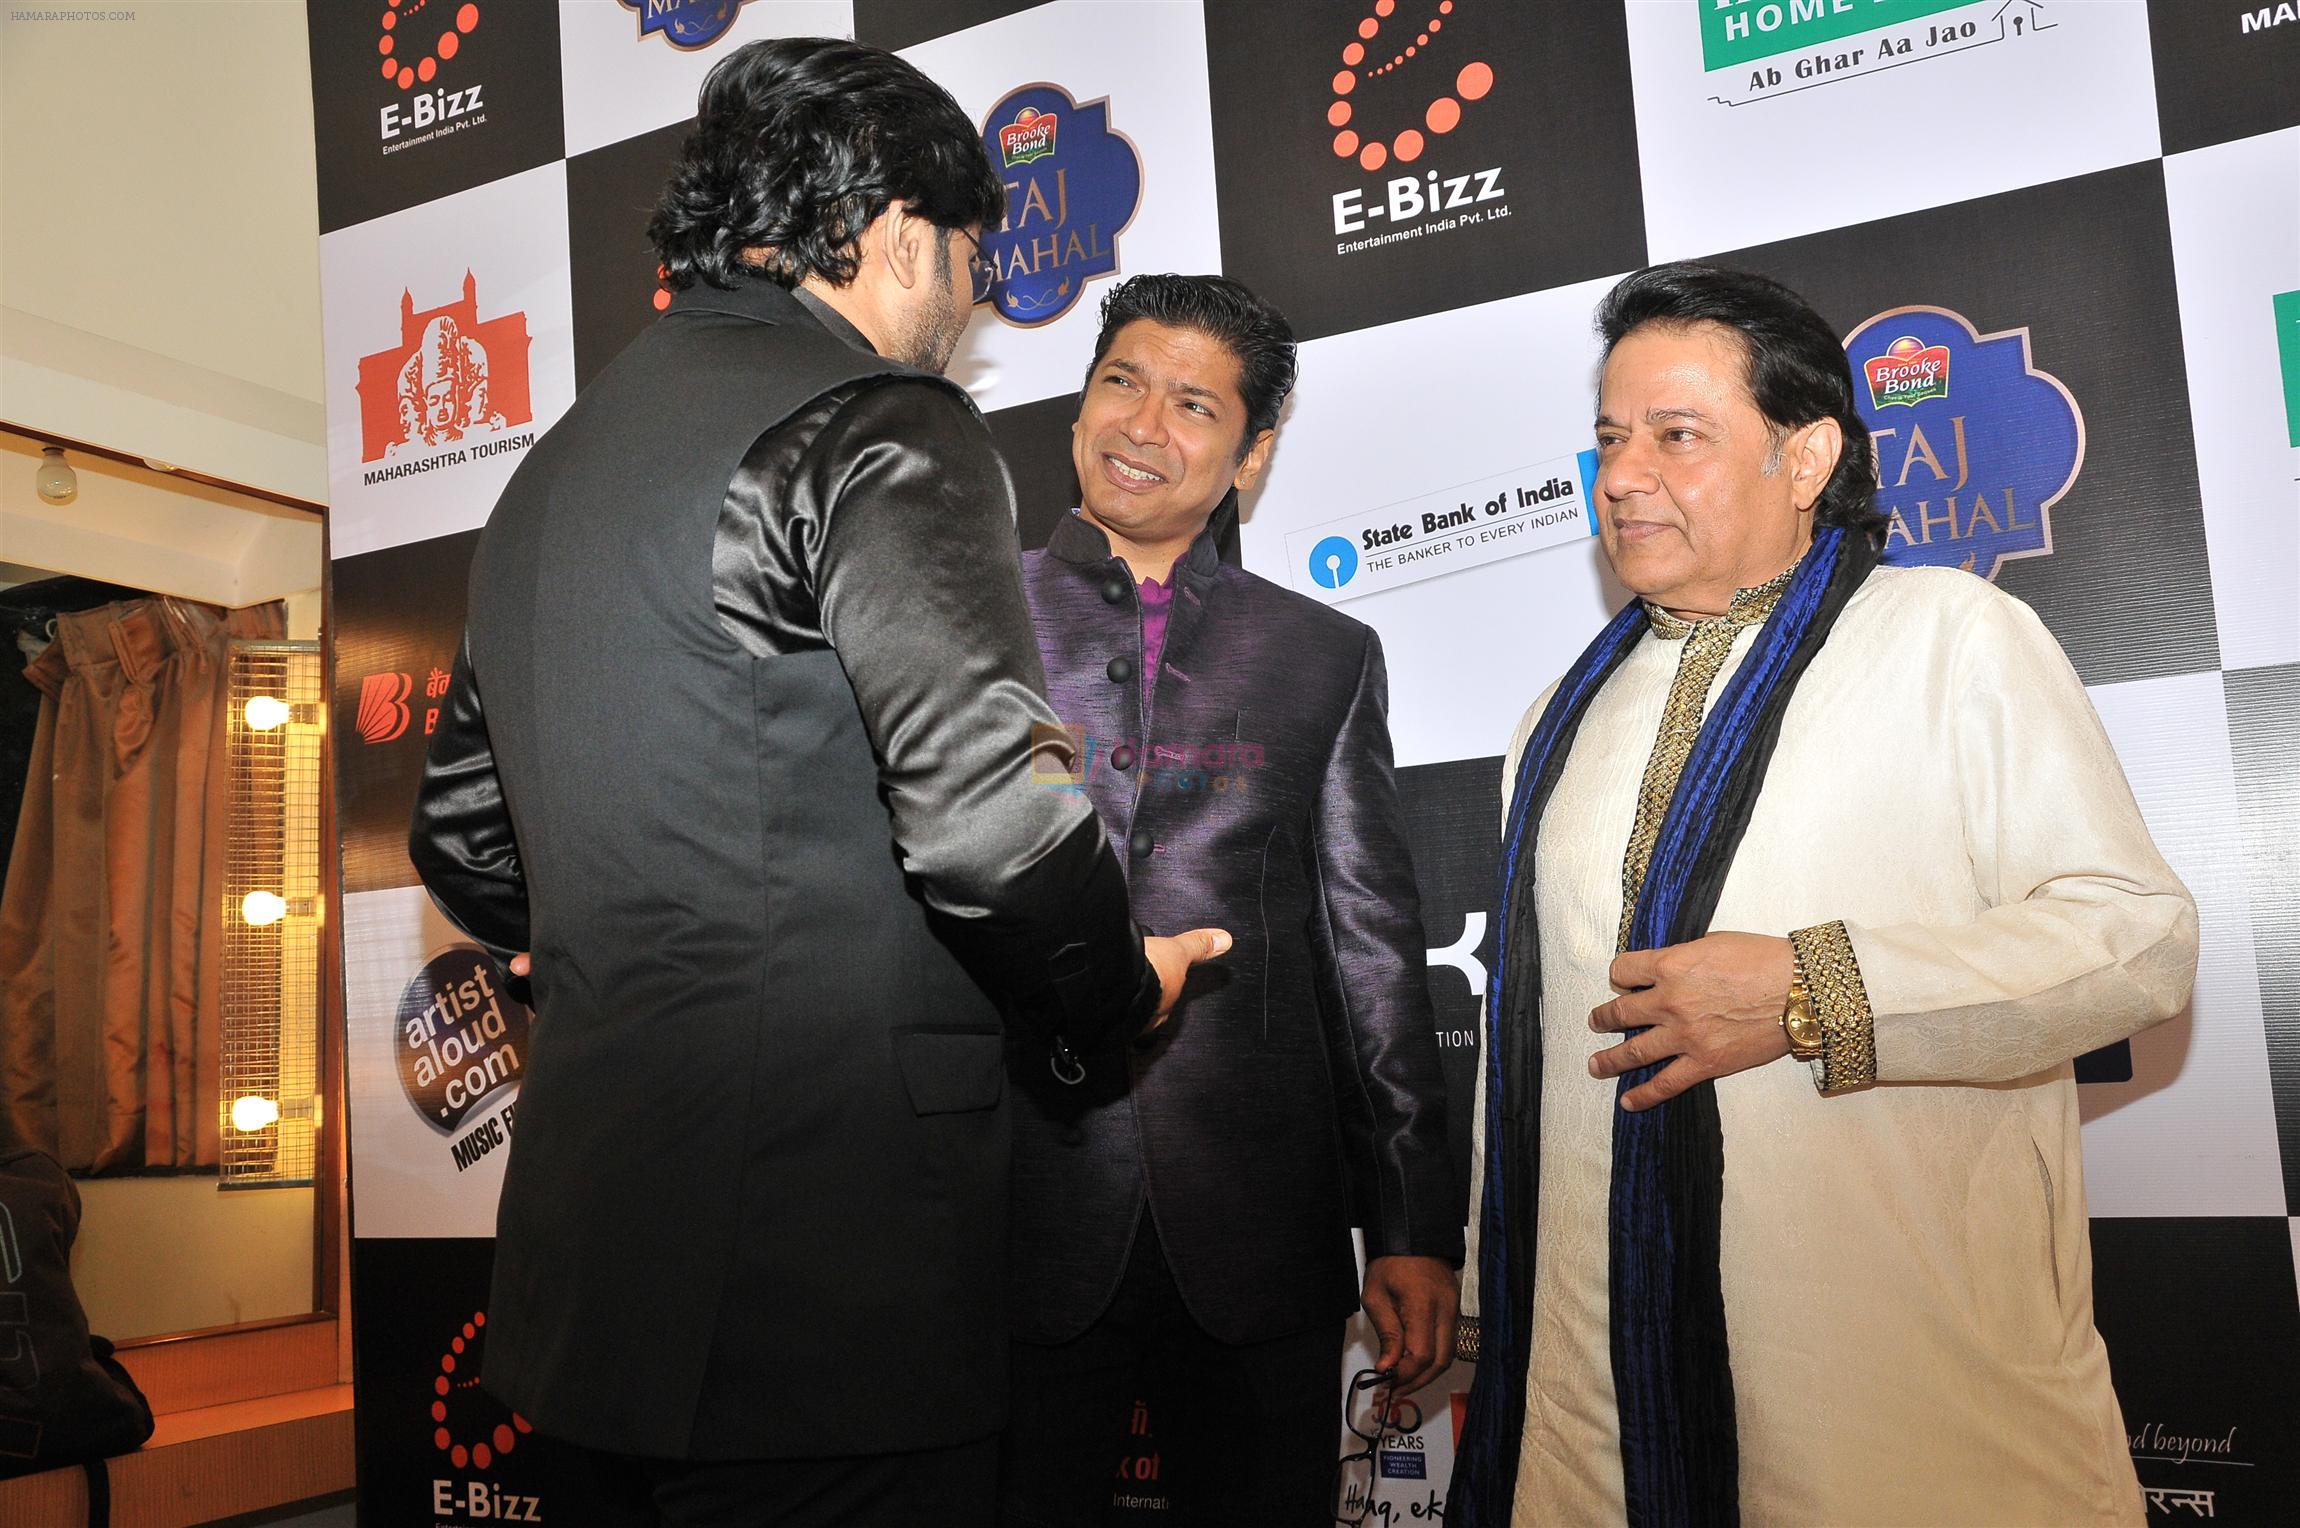 Anup jalota, Shaan, babul Supriyo at the Tribute to Jagjit Singh with musical concert Rehmatein in Mumbai on 18th July 2015